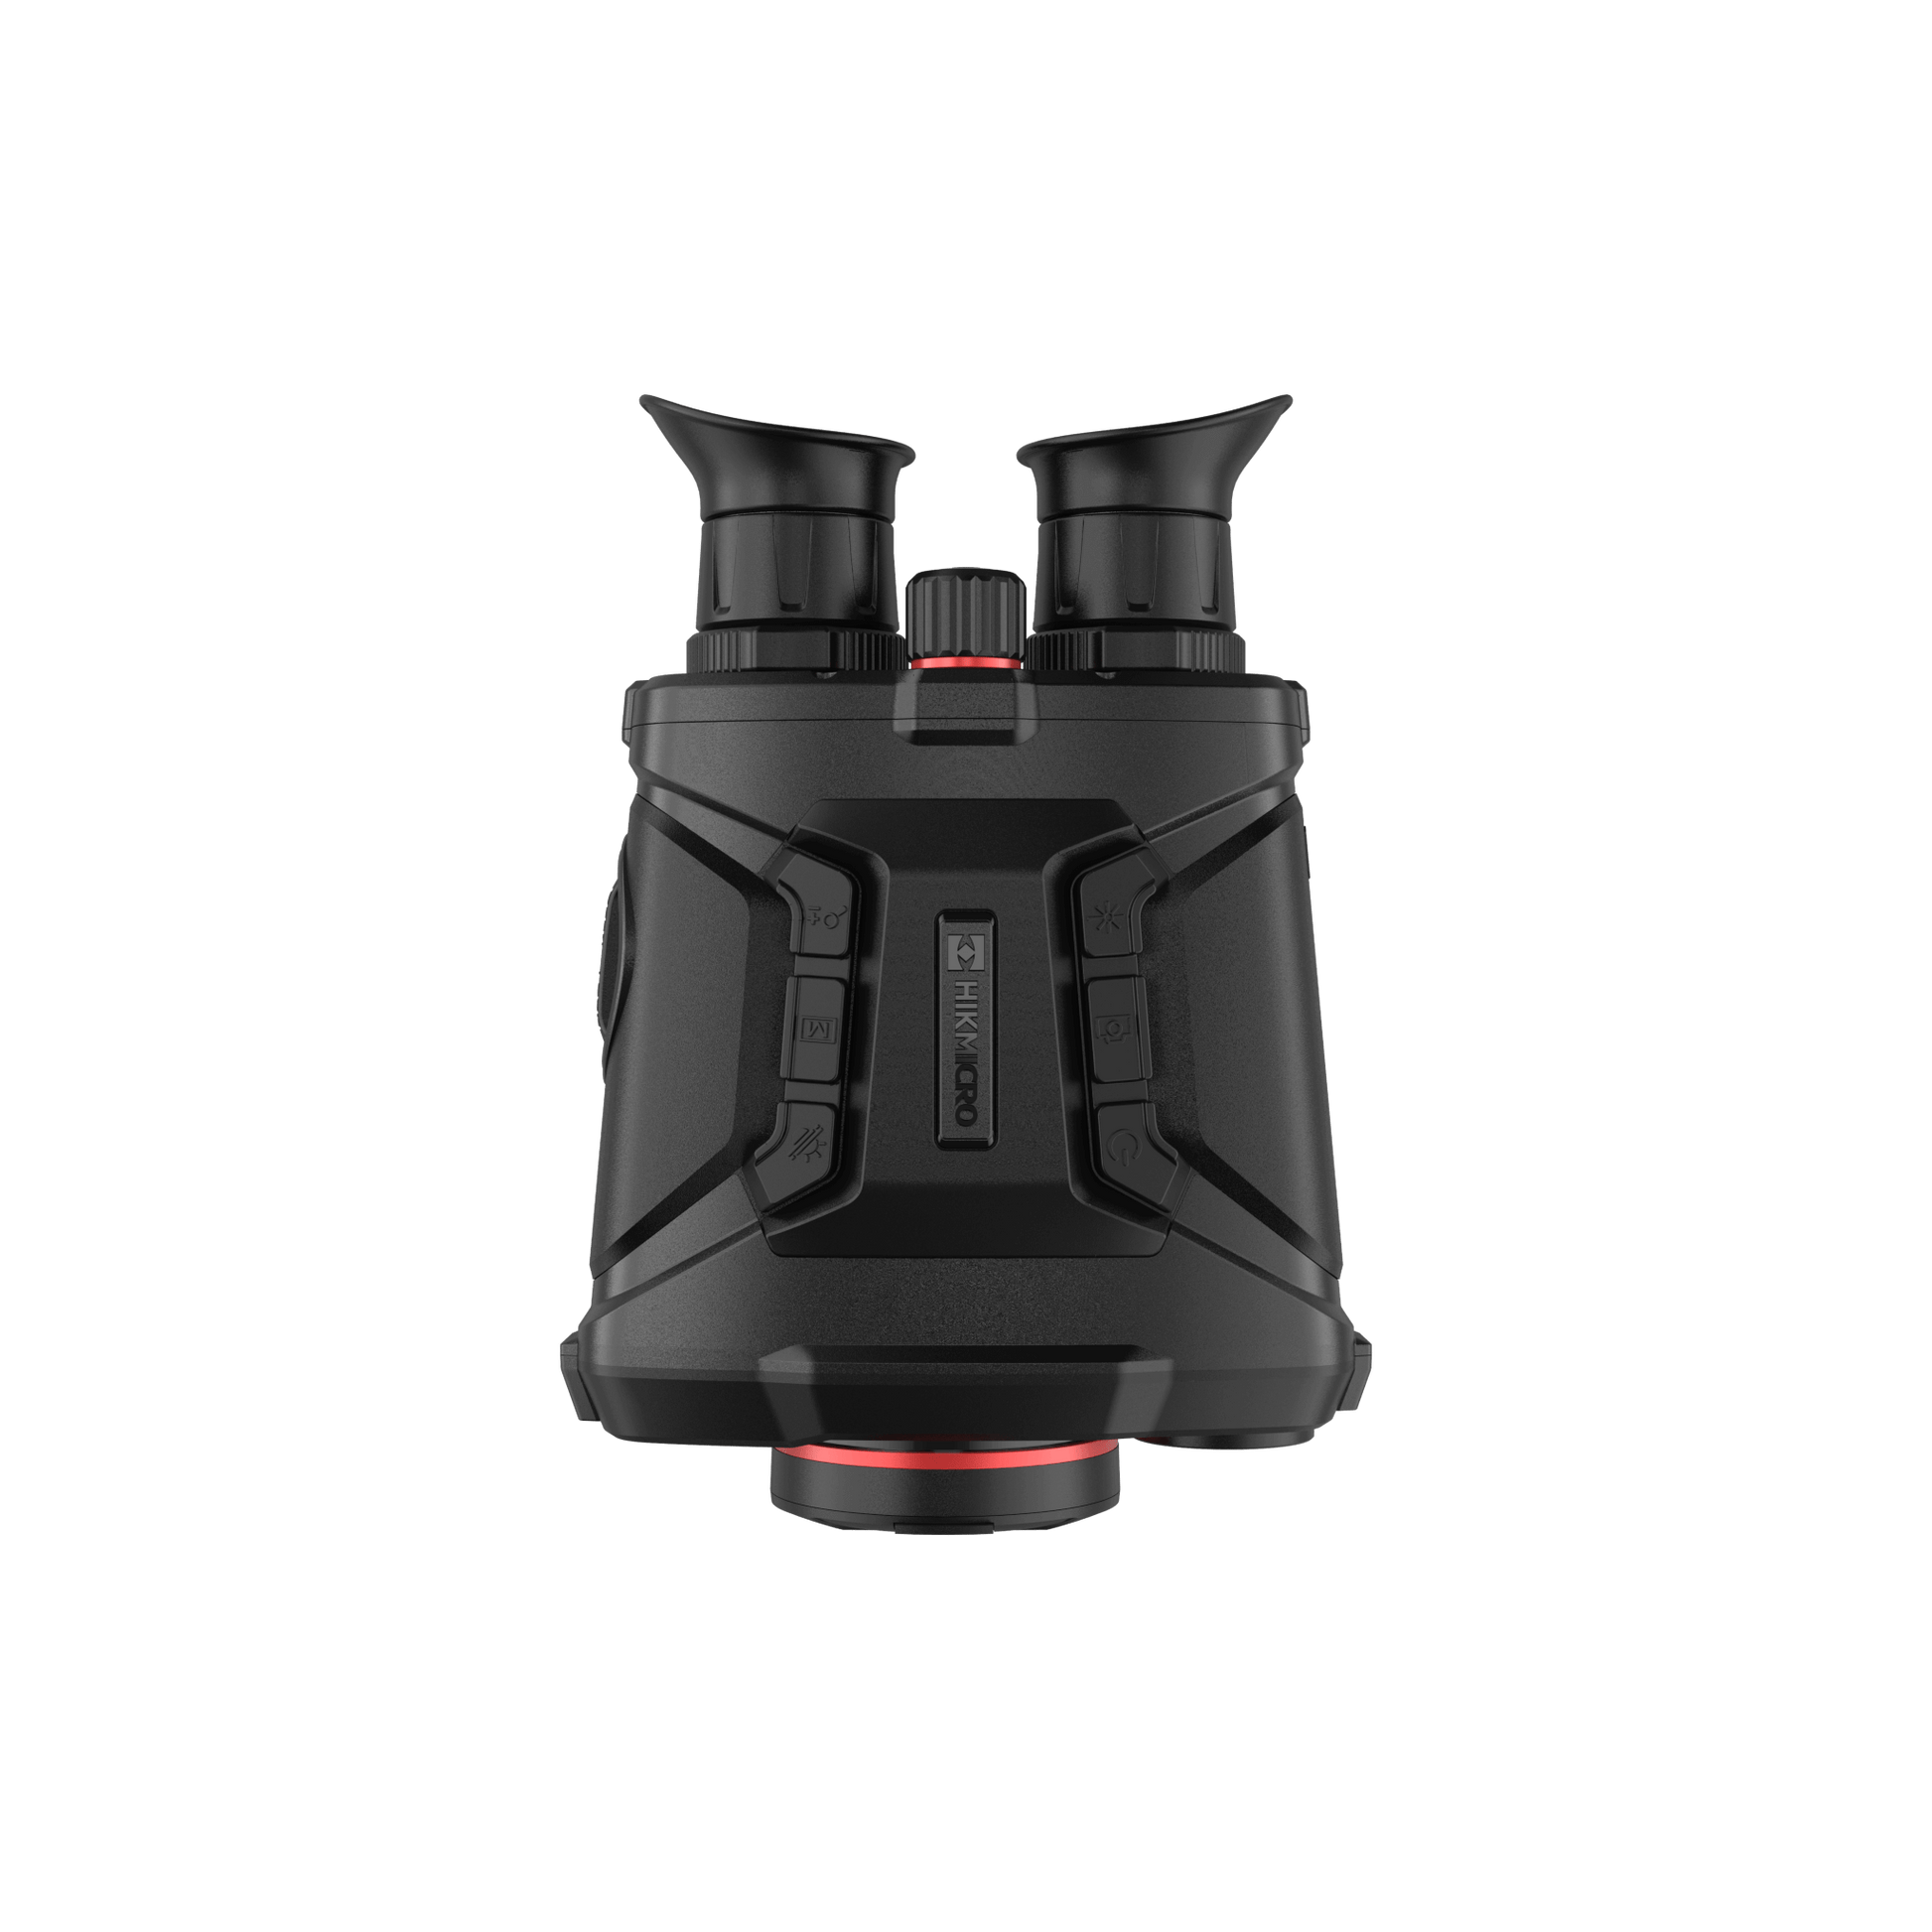 eld thermal binocular with infrared and optical capabilities - Top view